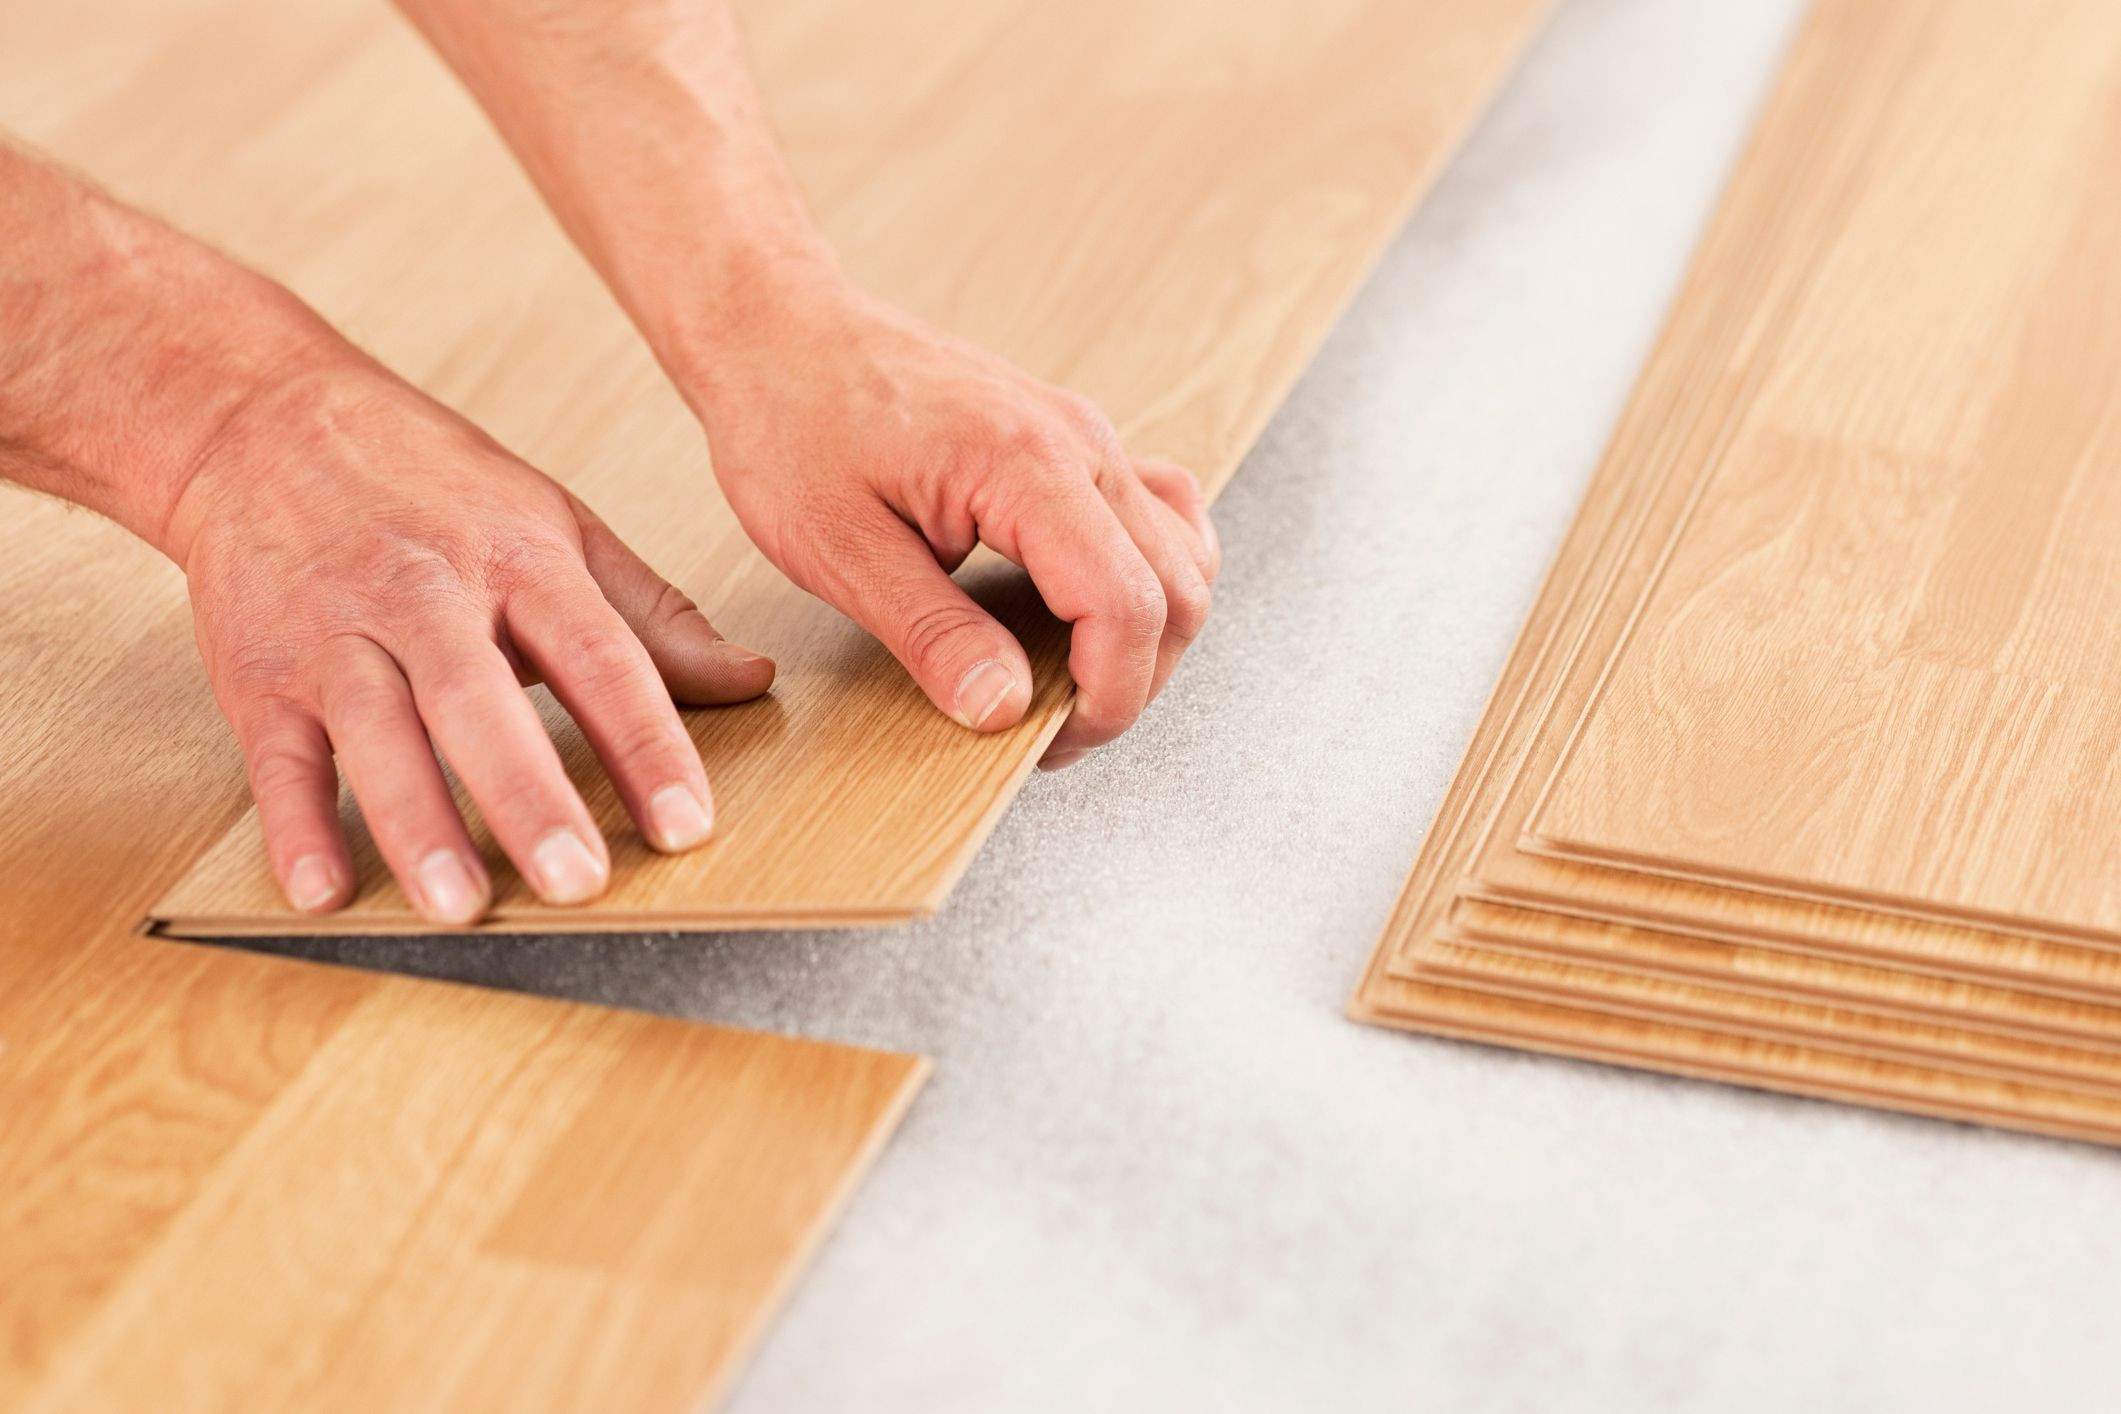 10 Cute How to Replace Engineered Hardwood Floor Planks 2024 free download how to replace engineered hardwood floor planks of laminate underlayment pros and cons within laminate floor install gettyimages 154961561 588816495f9b58bdb3da1a02